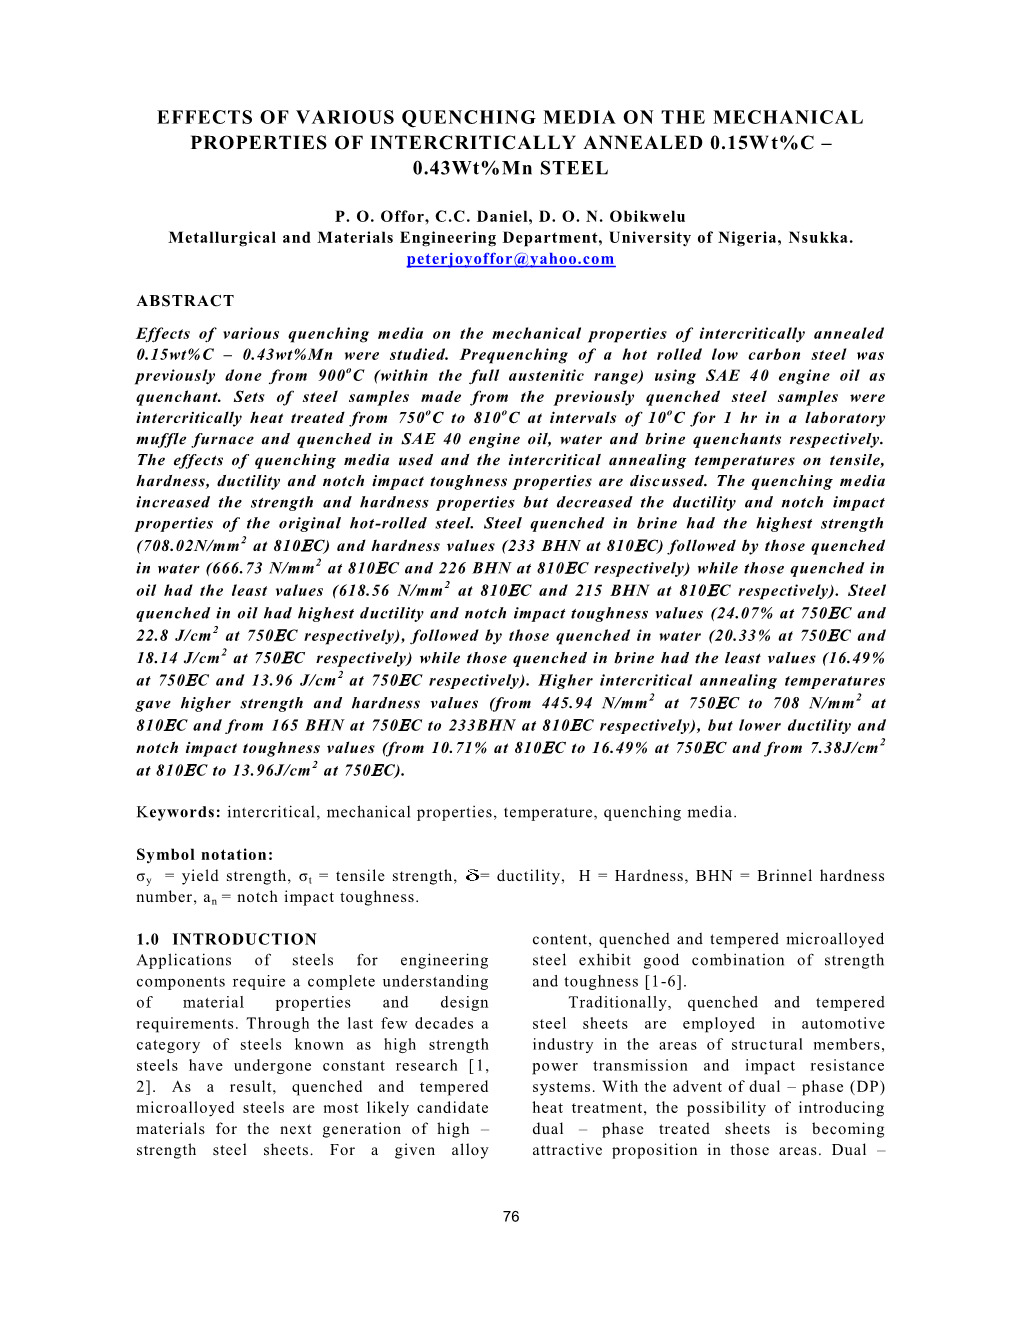 The Effects Heat Treatment on Mechnical Properties Of